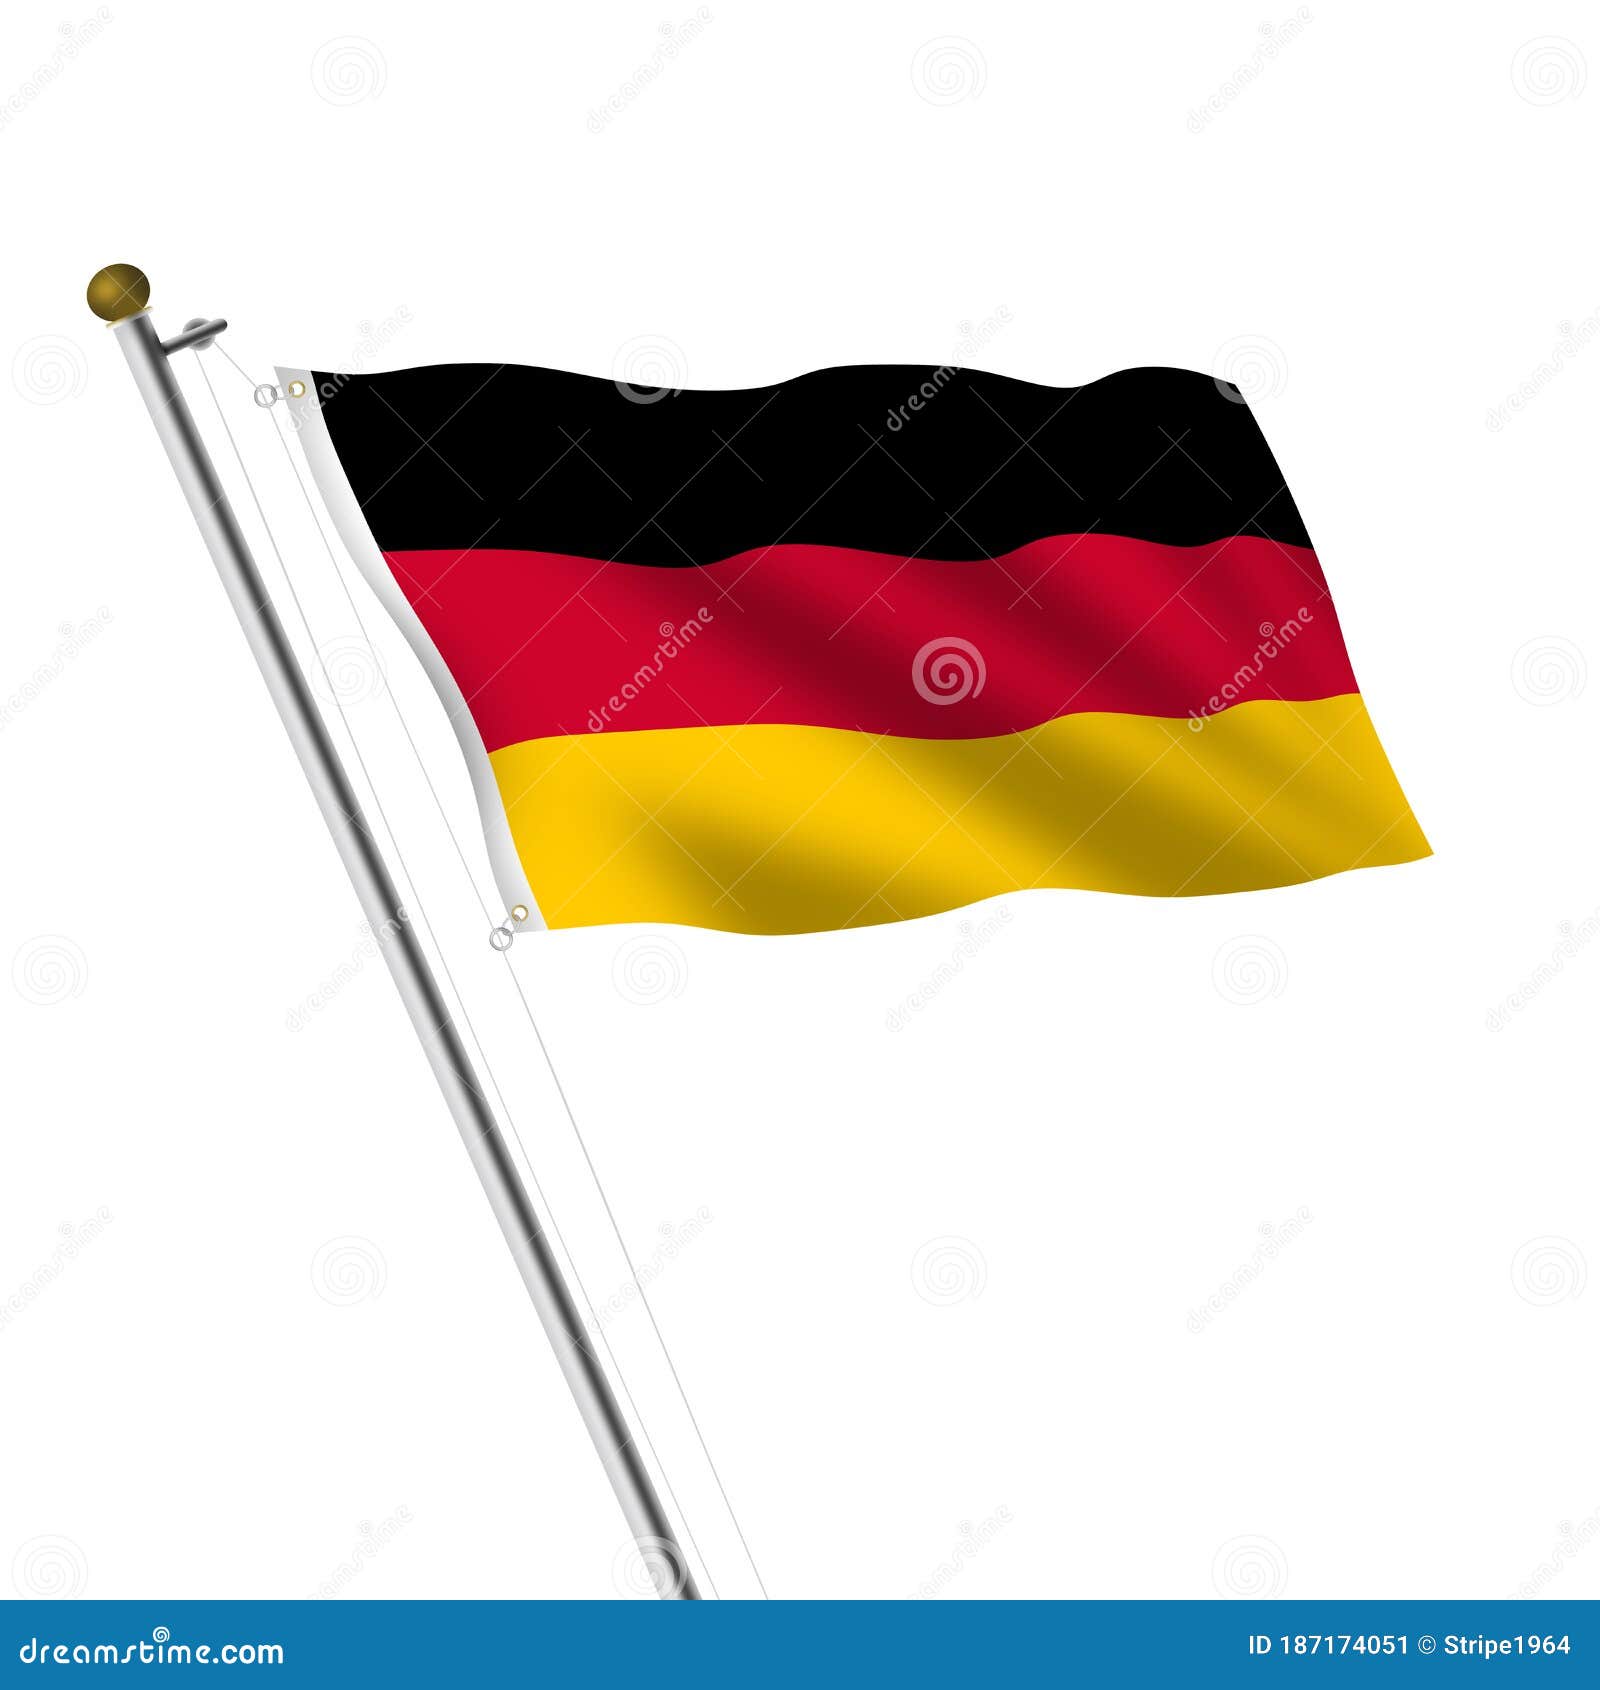 Germany Flagpole Illustration on White with Clipping Path Stock ...